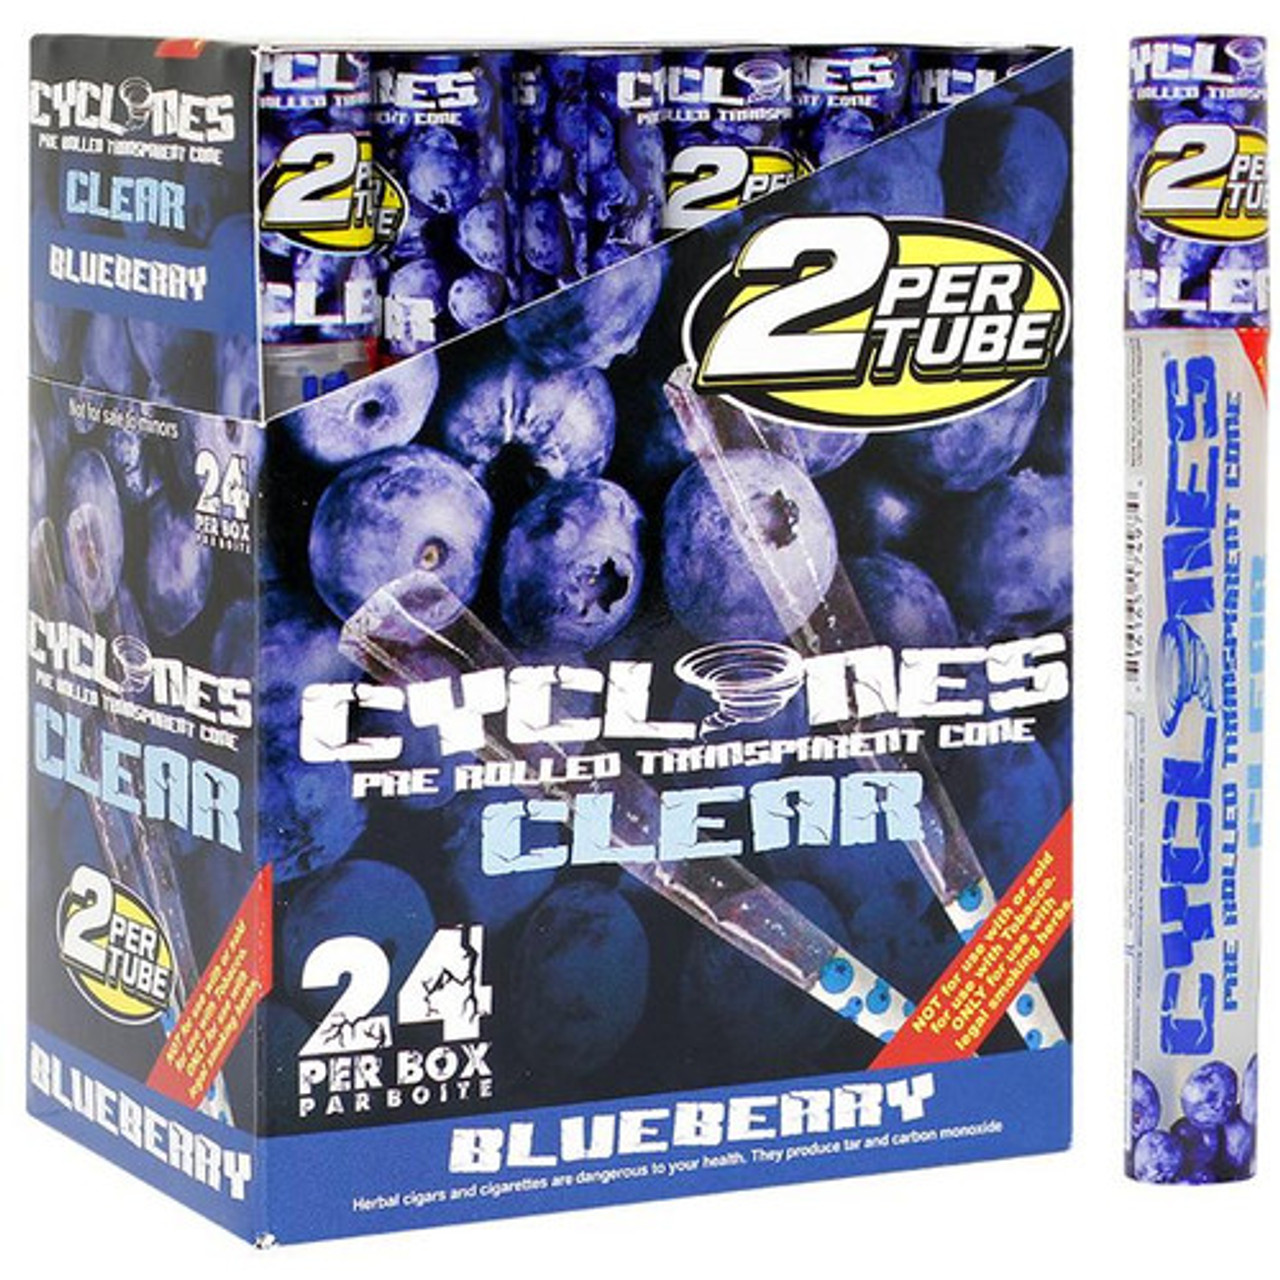 Cyclones Clear Blueberry Flavored Pre-Rolled Cones Box